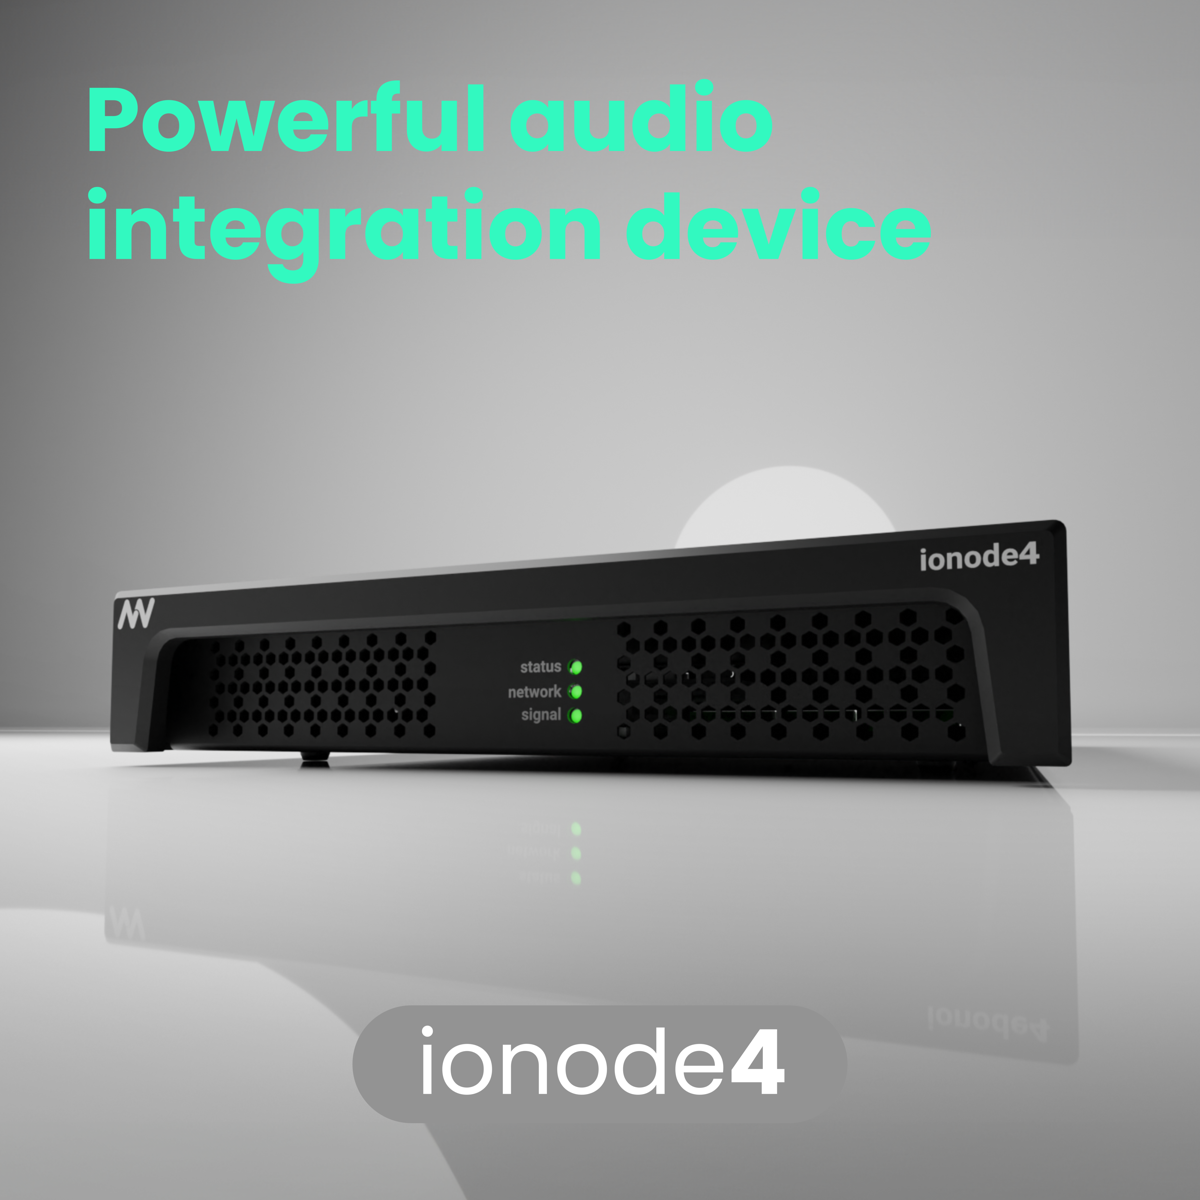  The ionode4 is presented as a powerful audio integration device. 